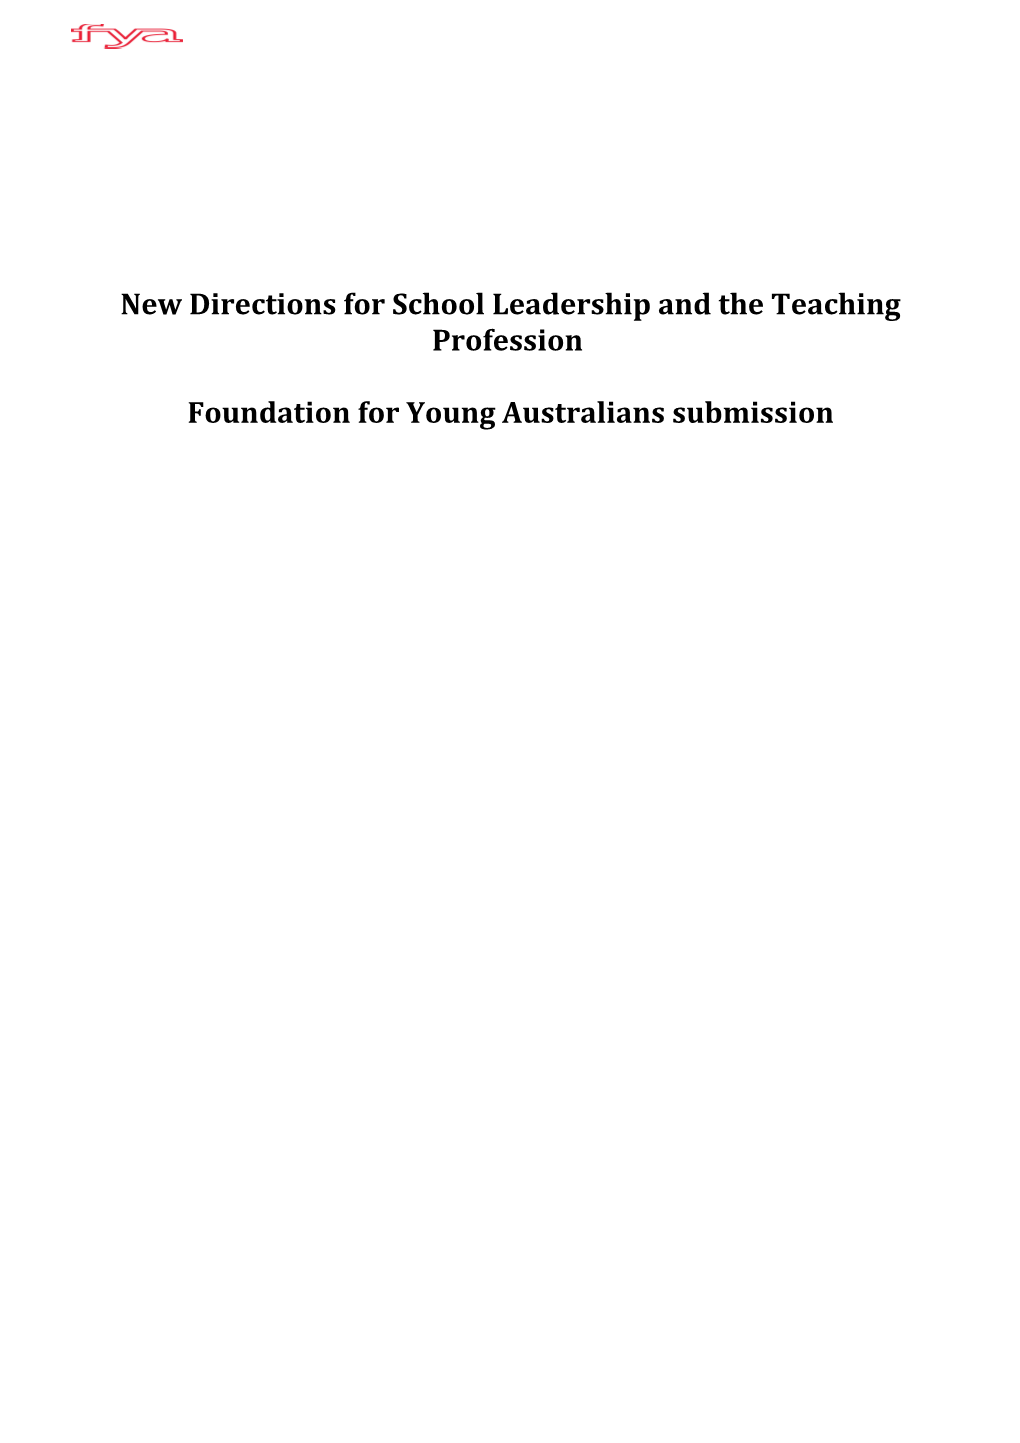 Foundation for Young Australians Submission